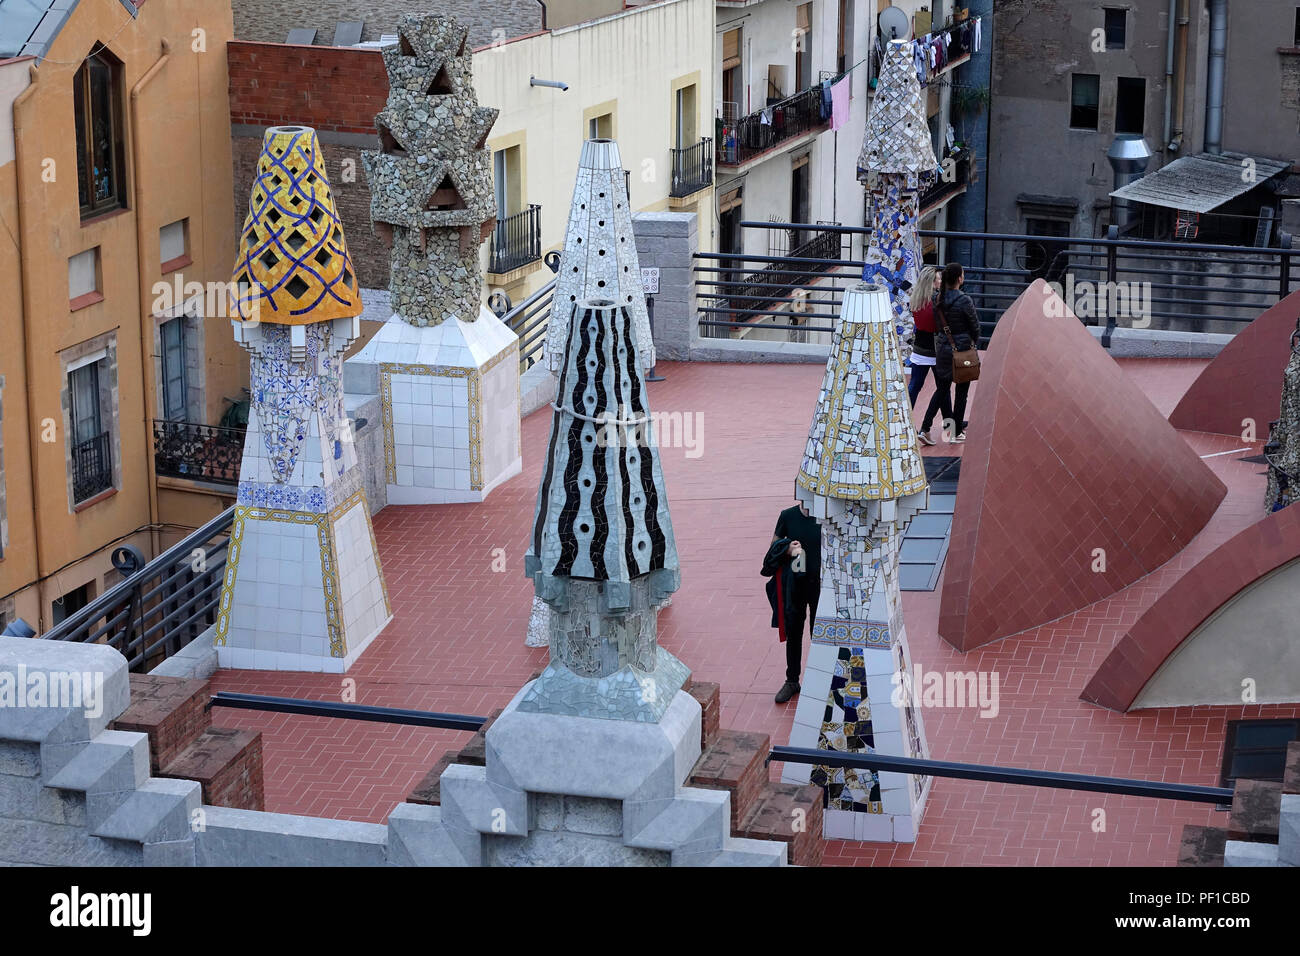 The Palau Guell Museum Rooftop Showing The Decorated Ceramic Chimneys Designed By Antoni Gaudí Barcelona Spain Stock Photo